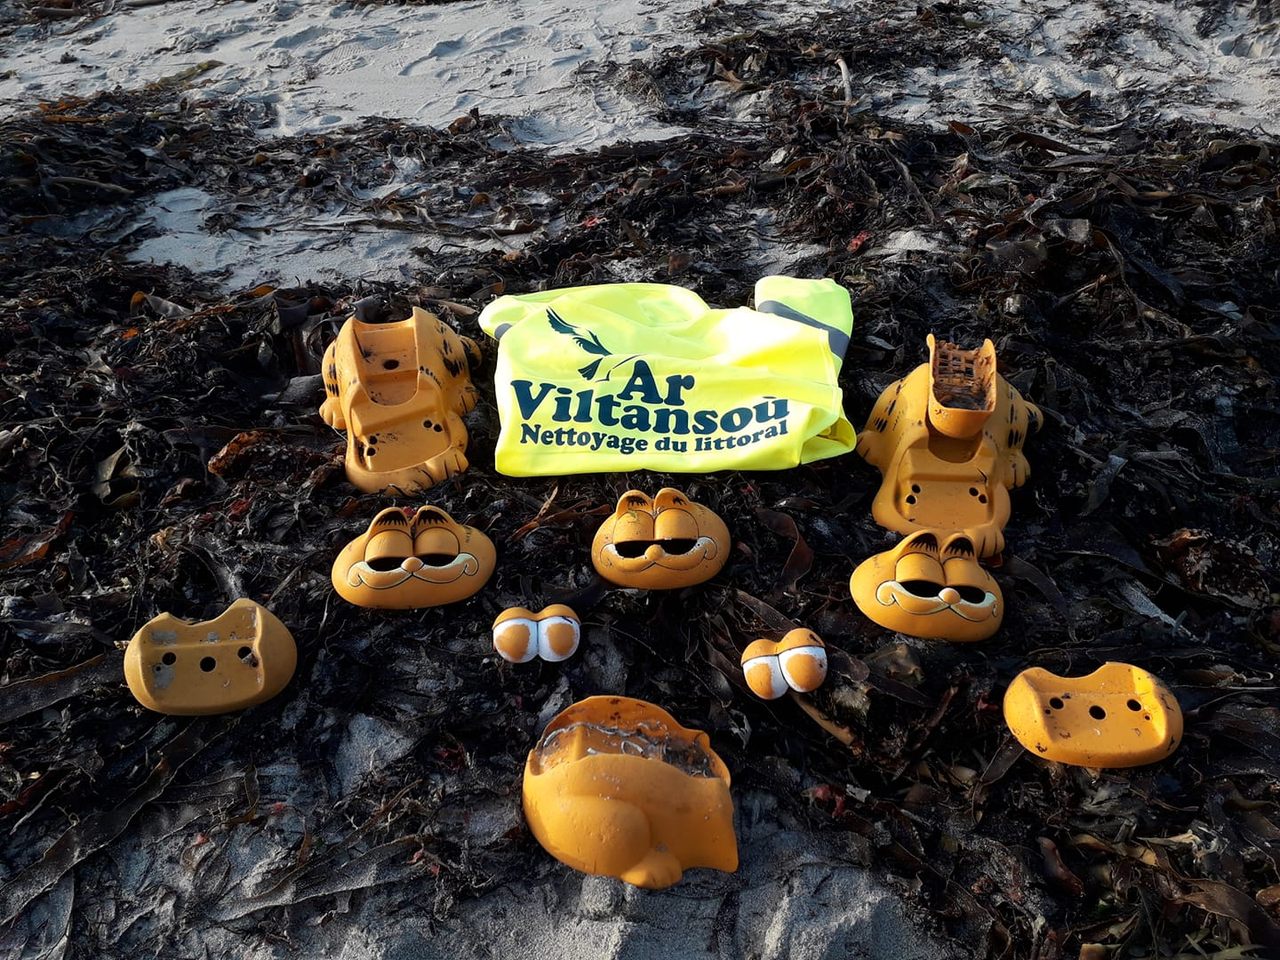 Pieces of these phones have been washing up on a Brittany beach for more than 30 years. 